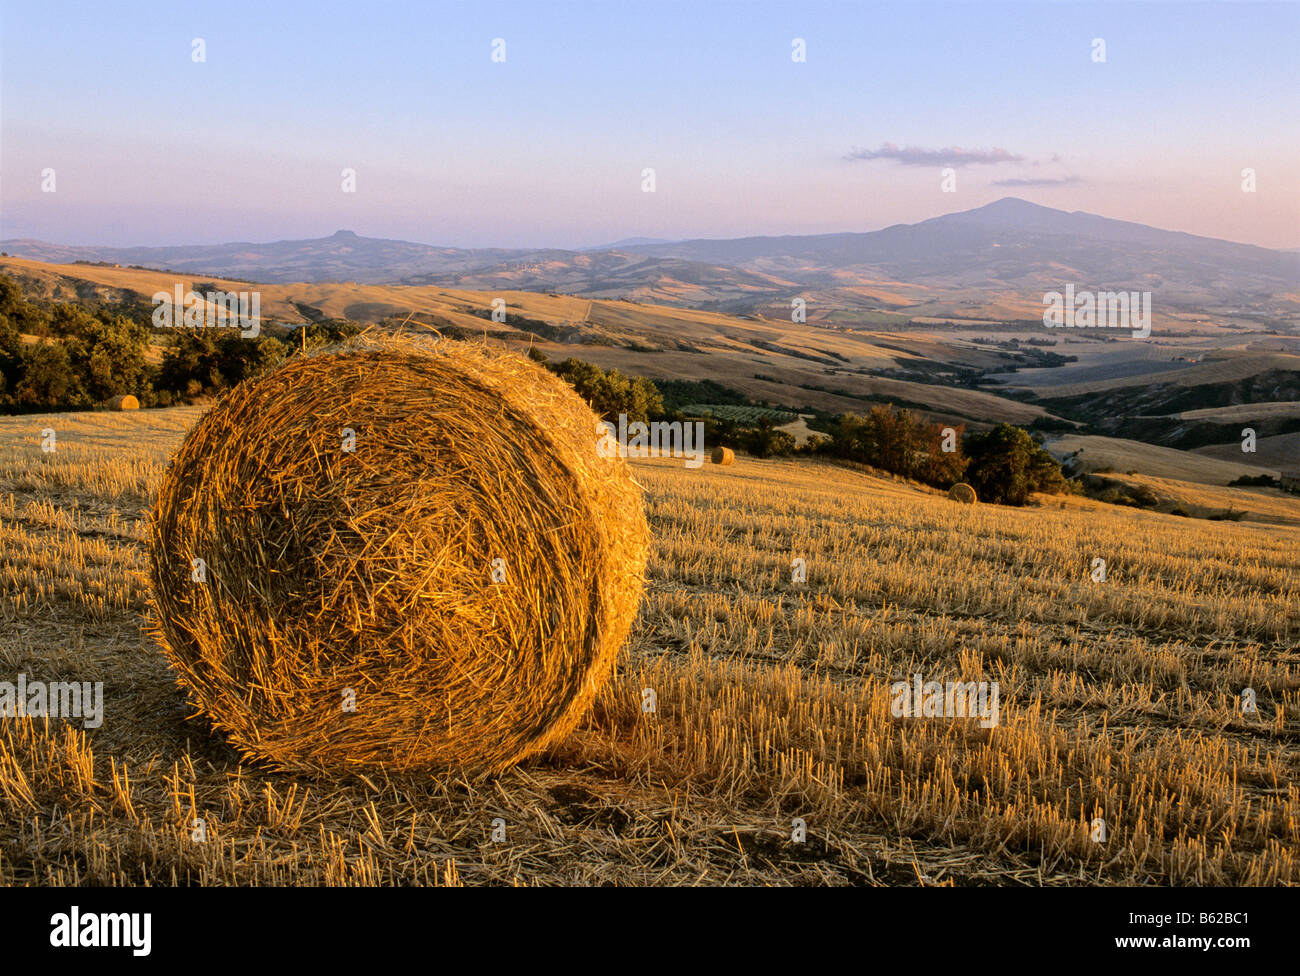 Bale of straw, harvested wheat fields, landscape in front of Radicofani and Monte Amiata at sunset, Val d' Orcia near Monticchi Stock Photo